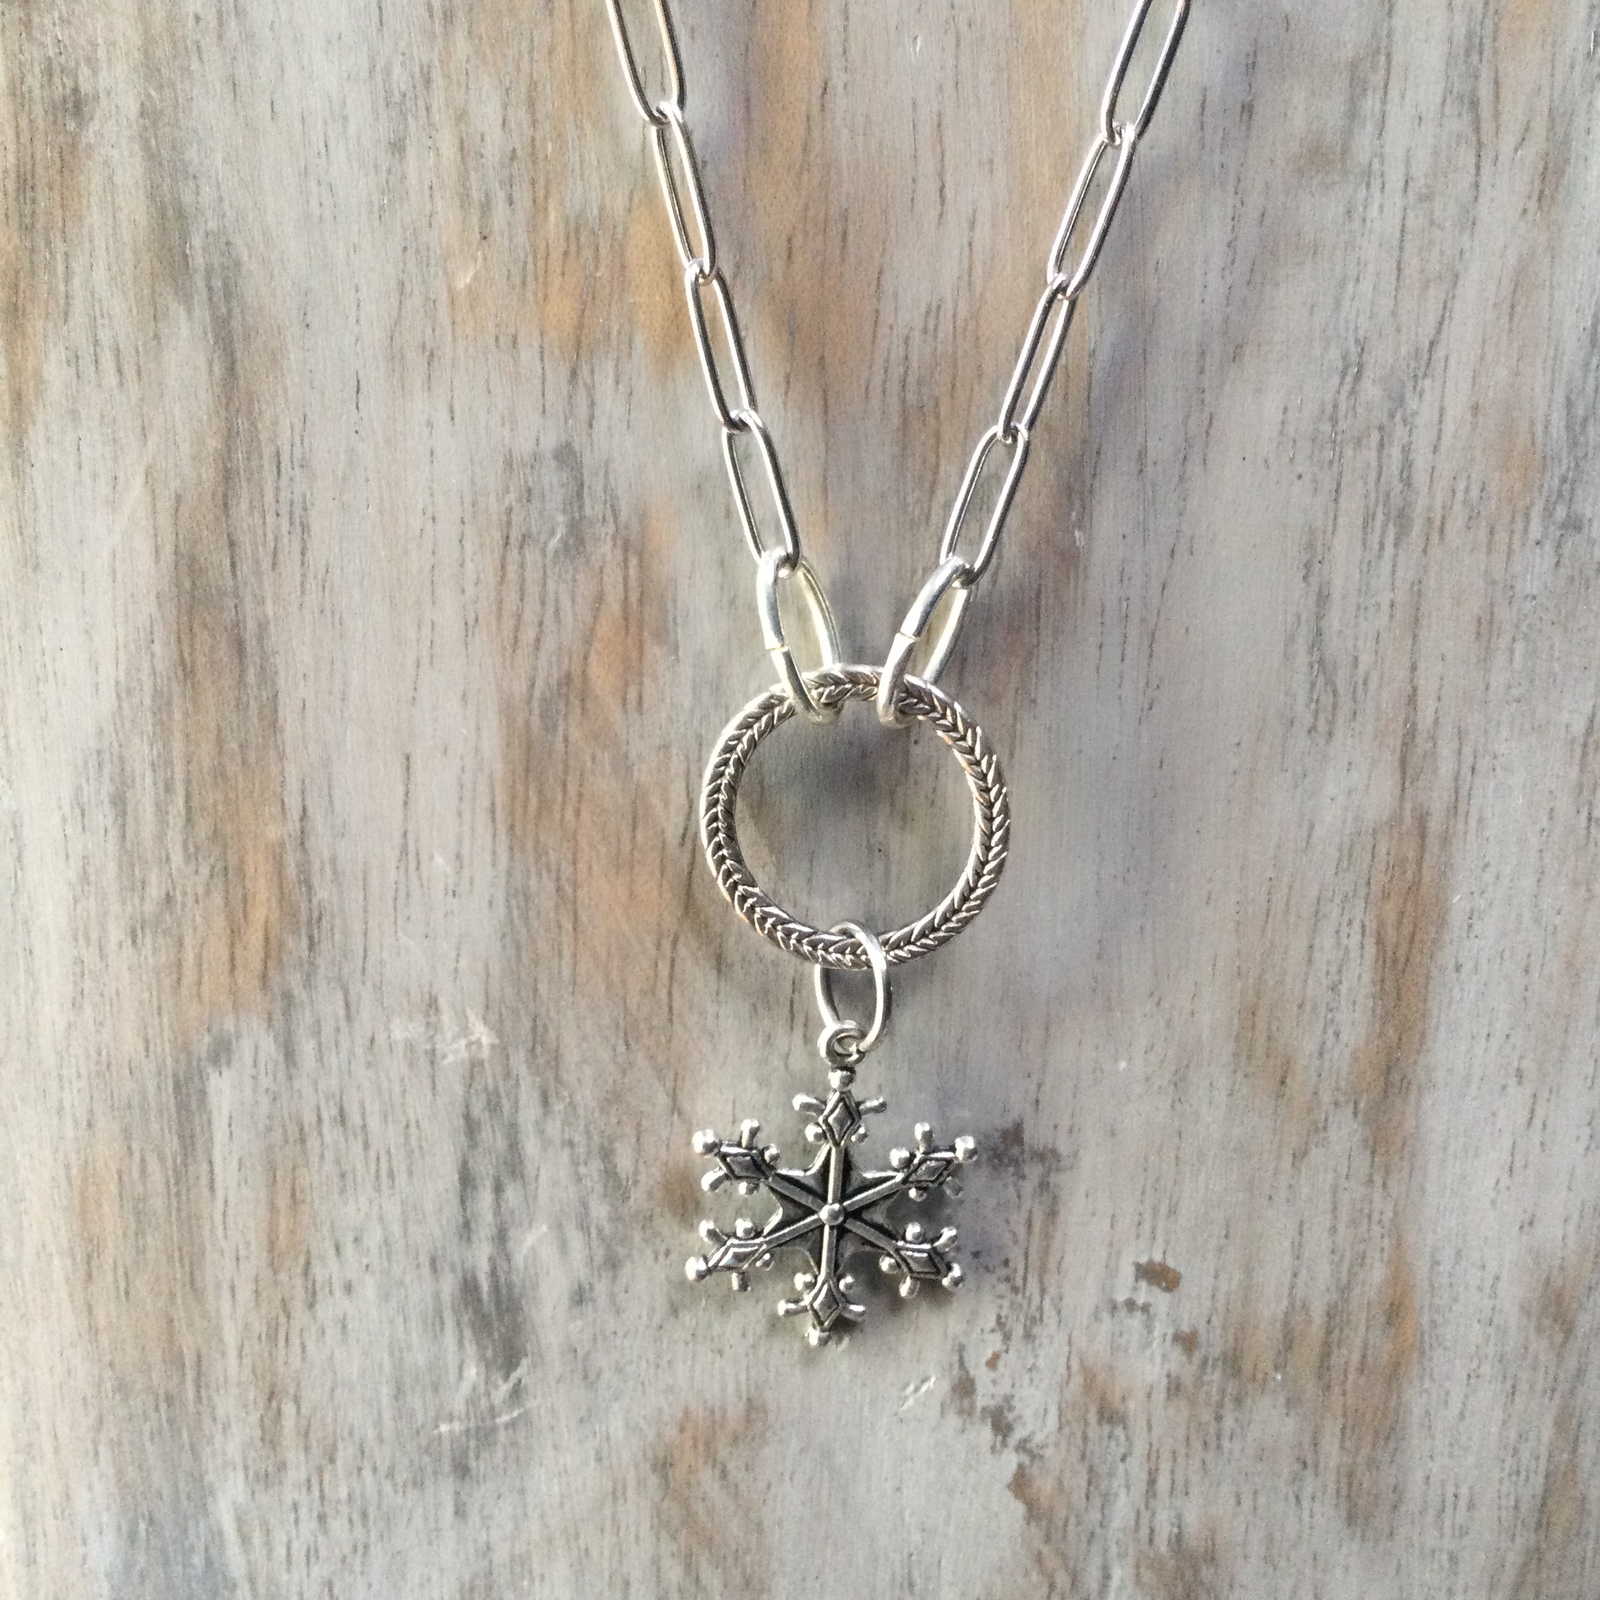 Snowflake Charm Necklace  - $28.00